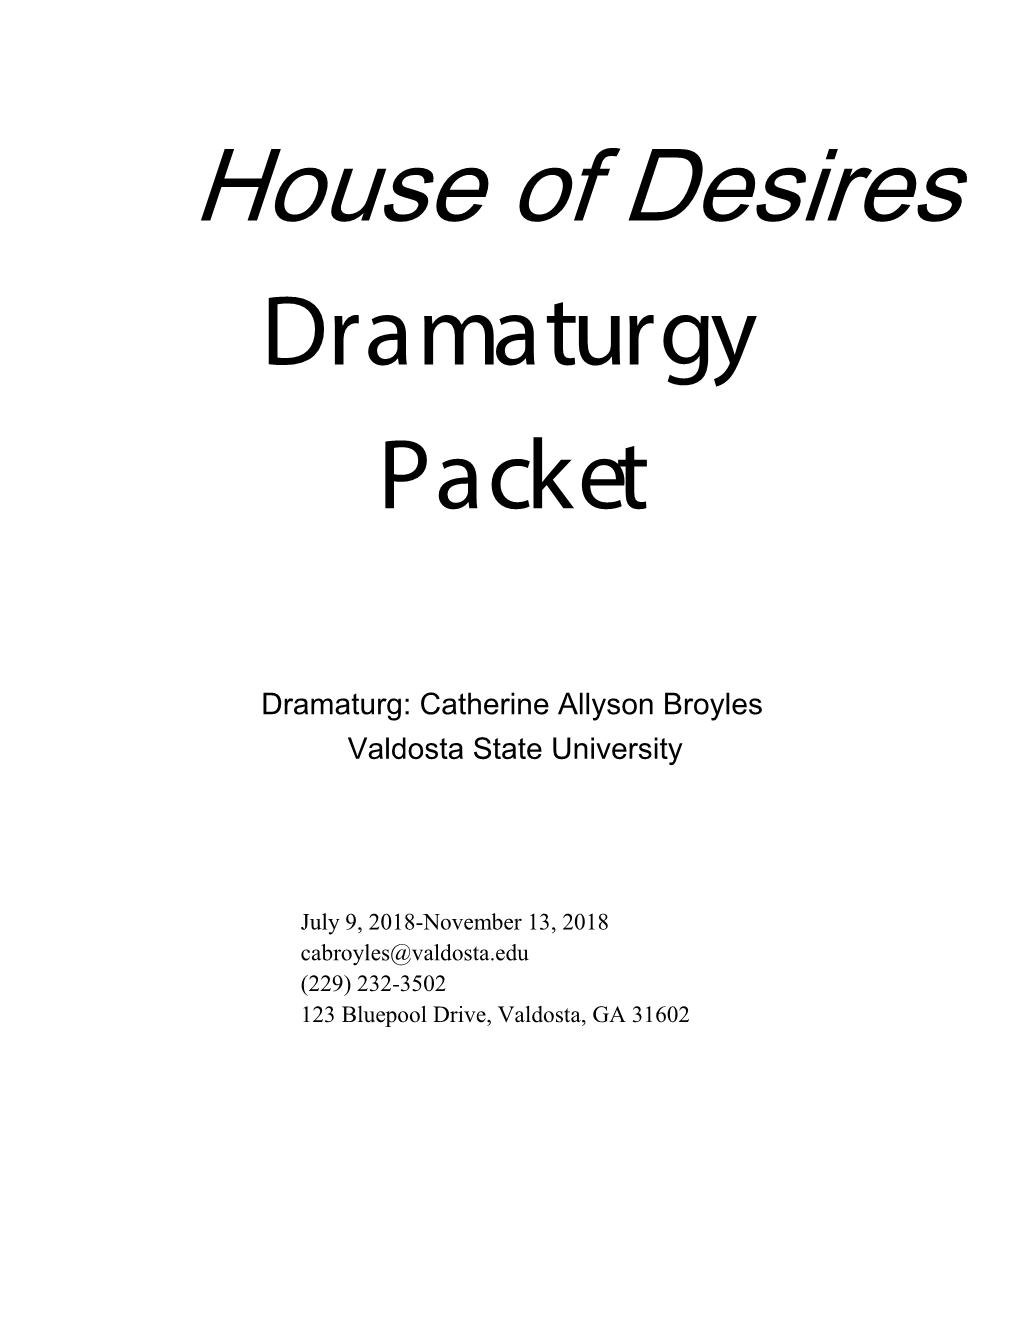 House of Desires Dramaturgy Packet